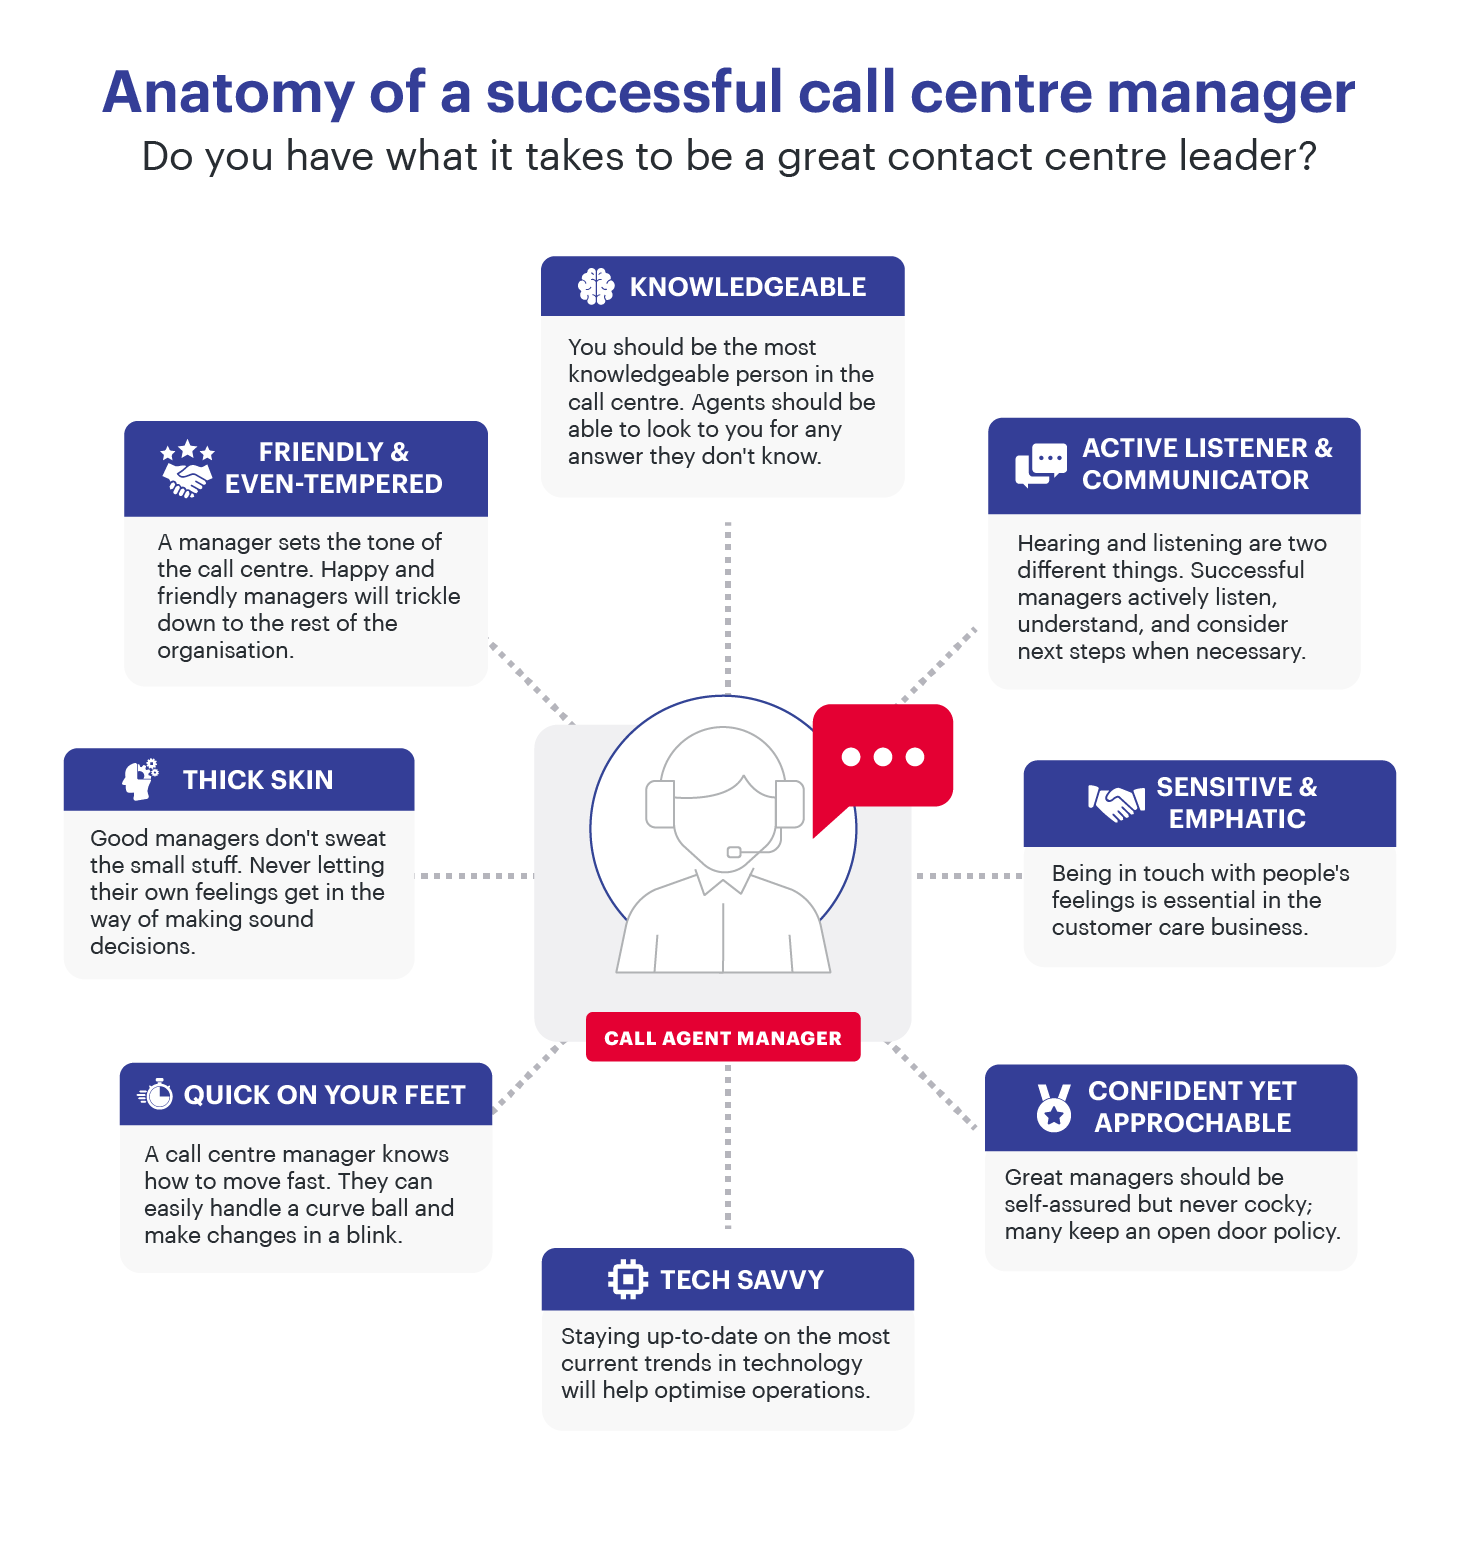 Anatomy of a successful call center manager